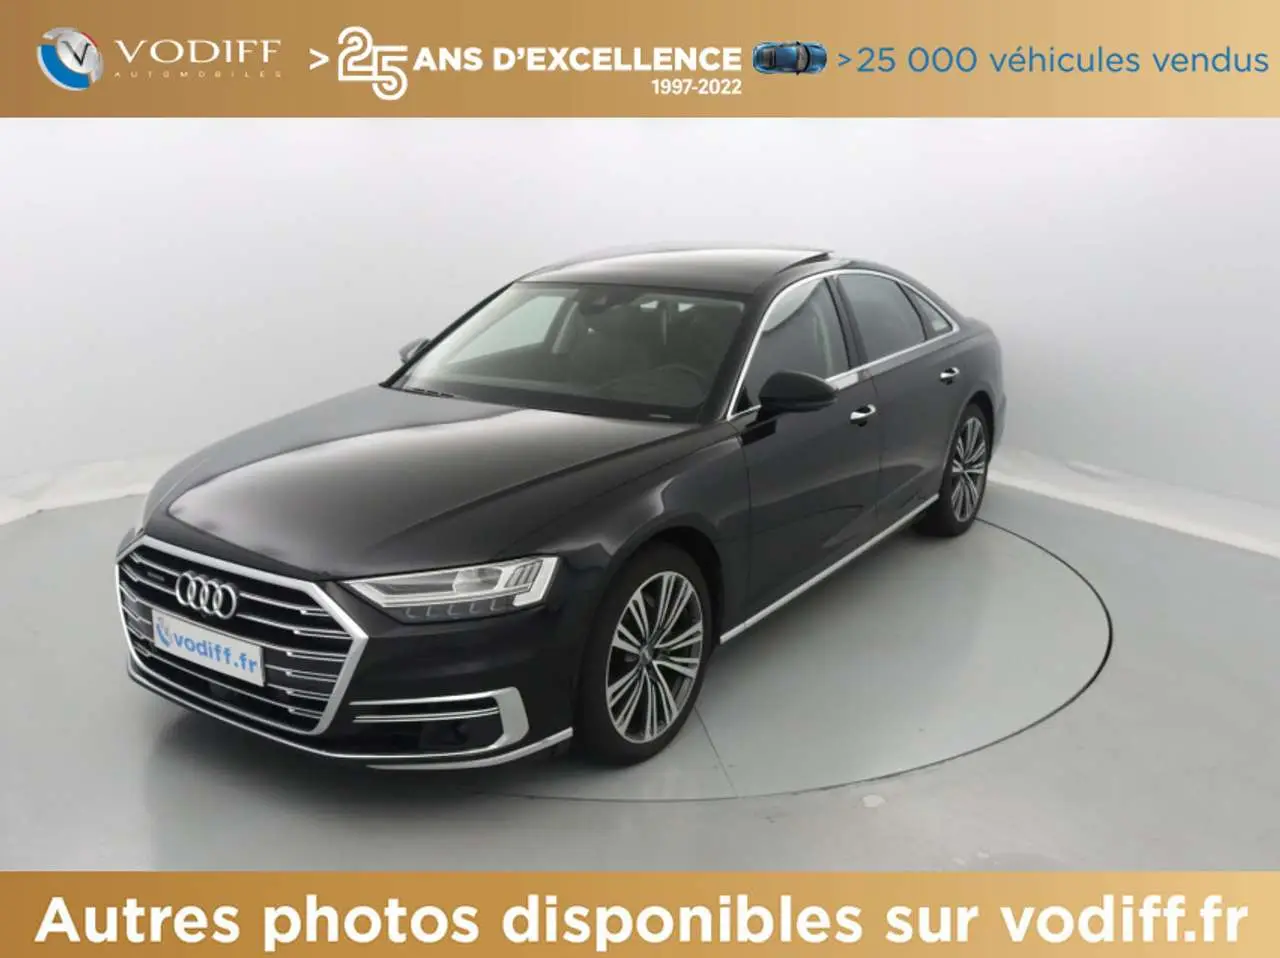 Photo 1 : Audi A8 2017 Others